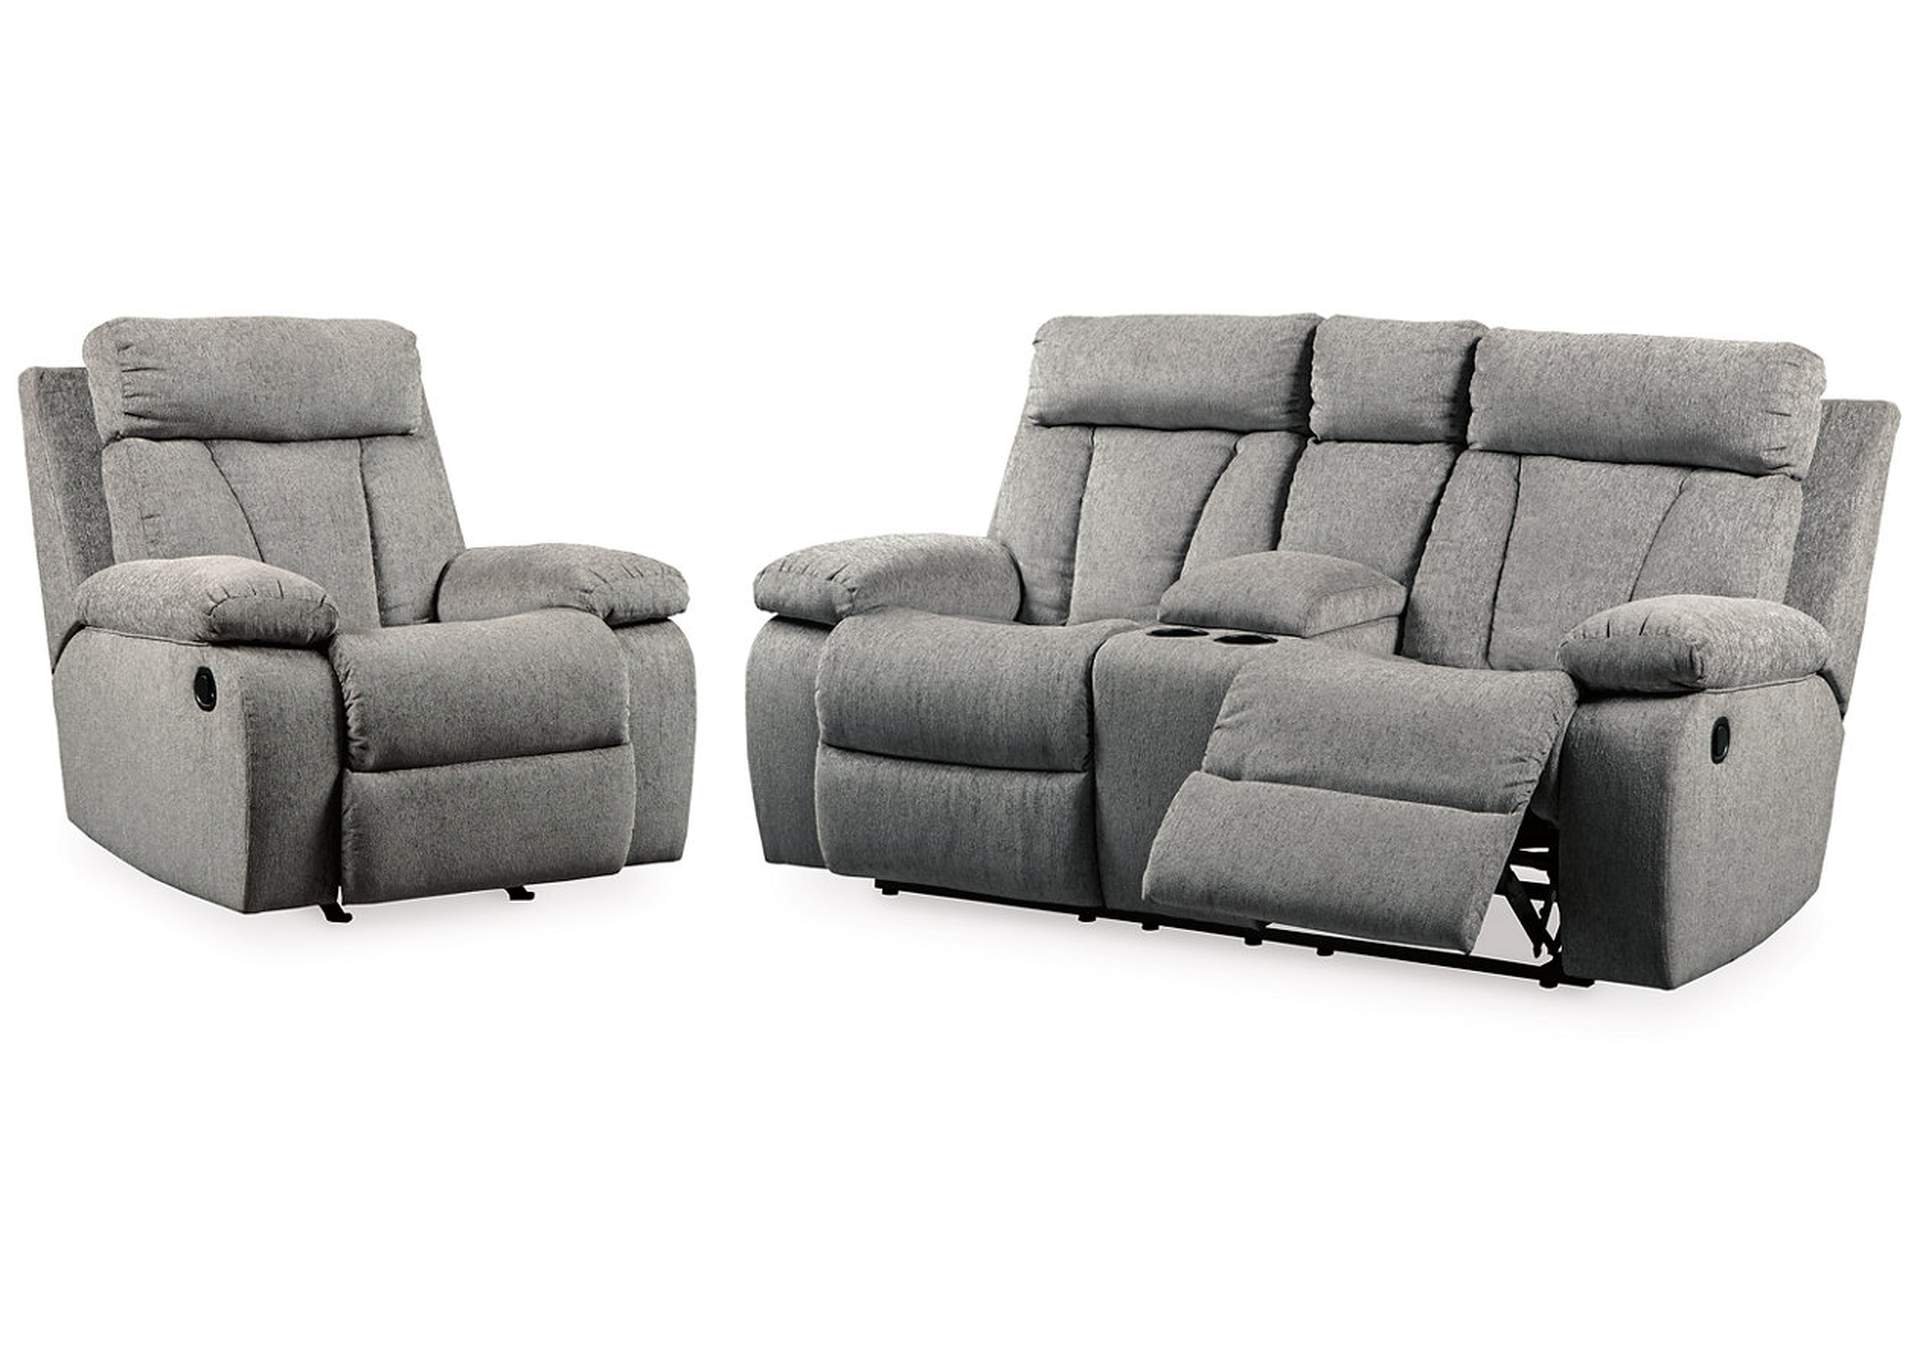 Mitchiner Reclining Loveseat and Recliner,Signature Design By Ashley